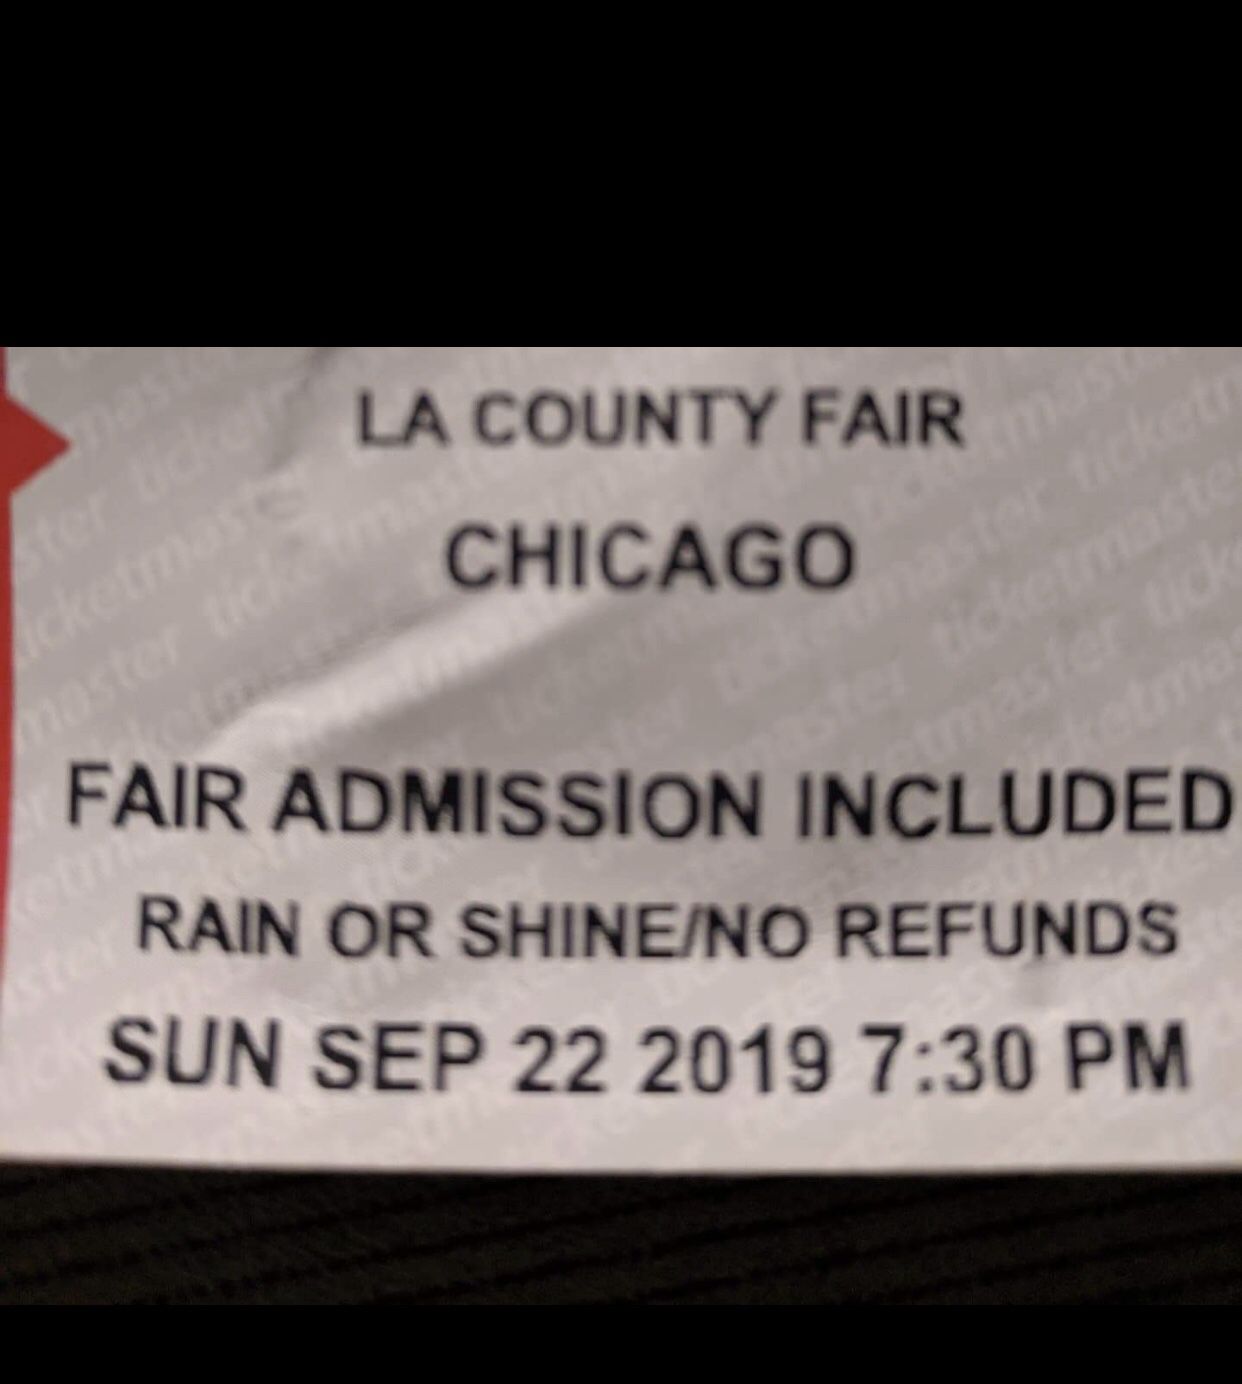 Chicago Concert Ticket at LA County Fair - Sunday 09/22/2019 - includes entrance to the LA County Fair